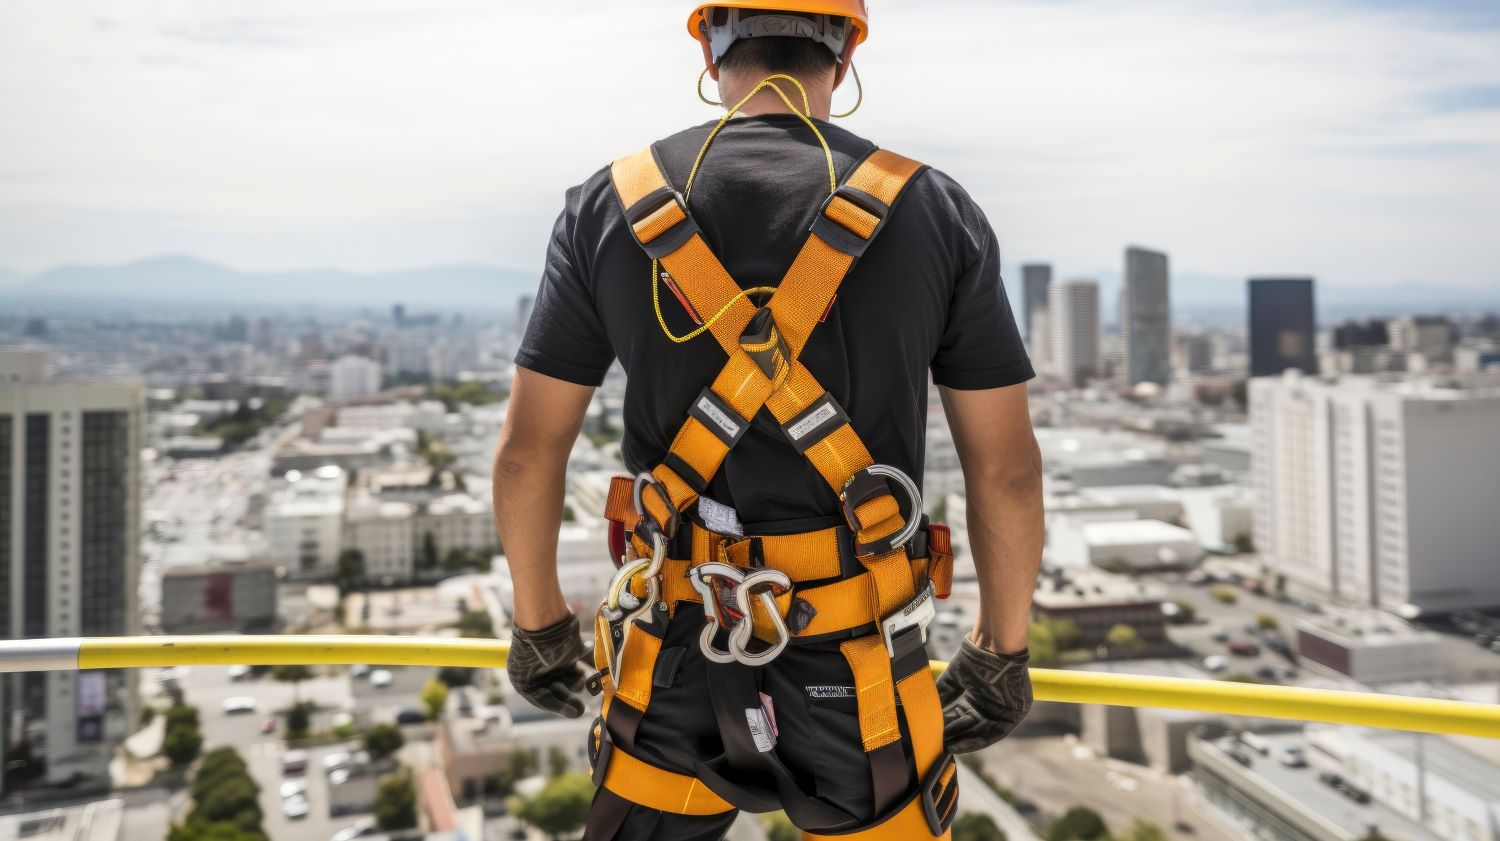 man working oil rigging site wearing fall protection gear